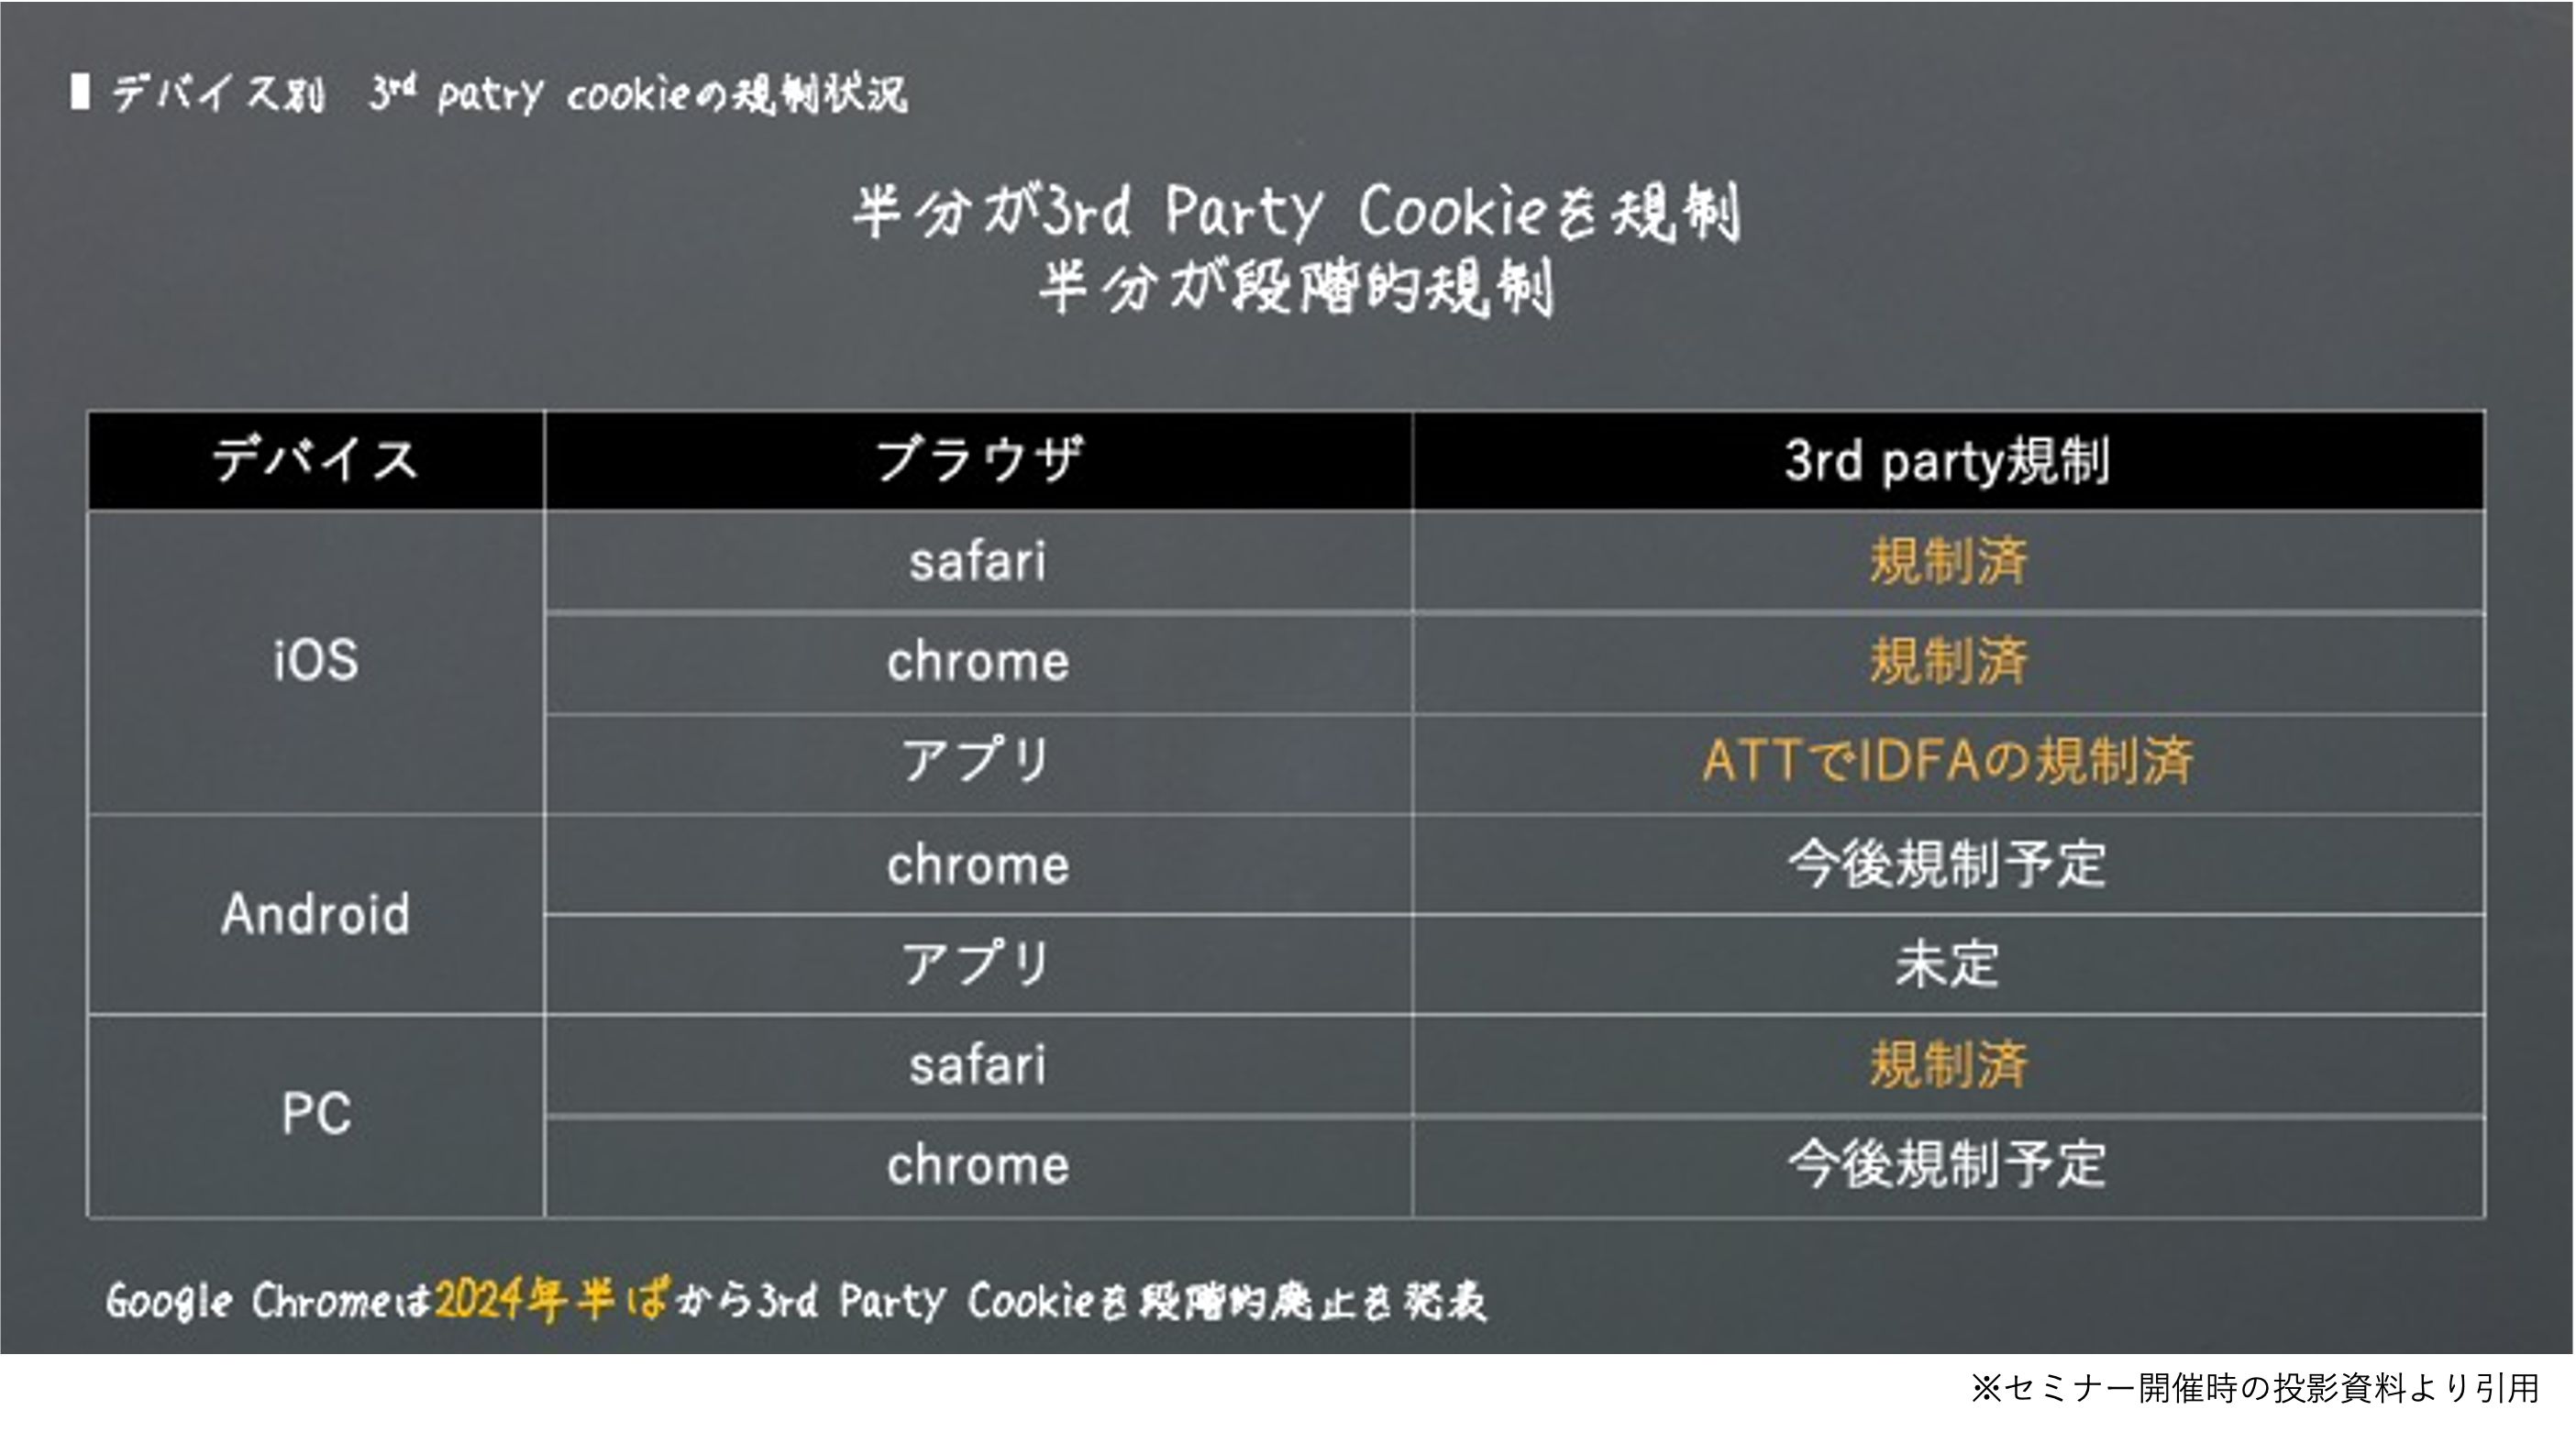 3rd Party Cookieの規制状況